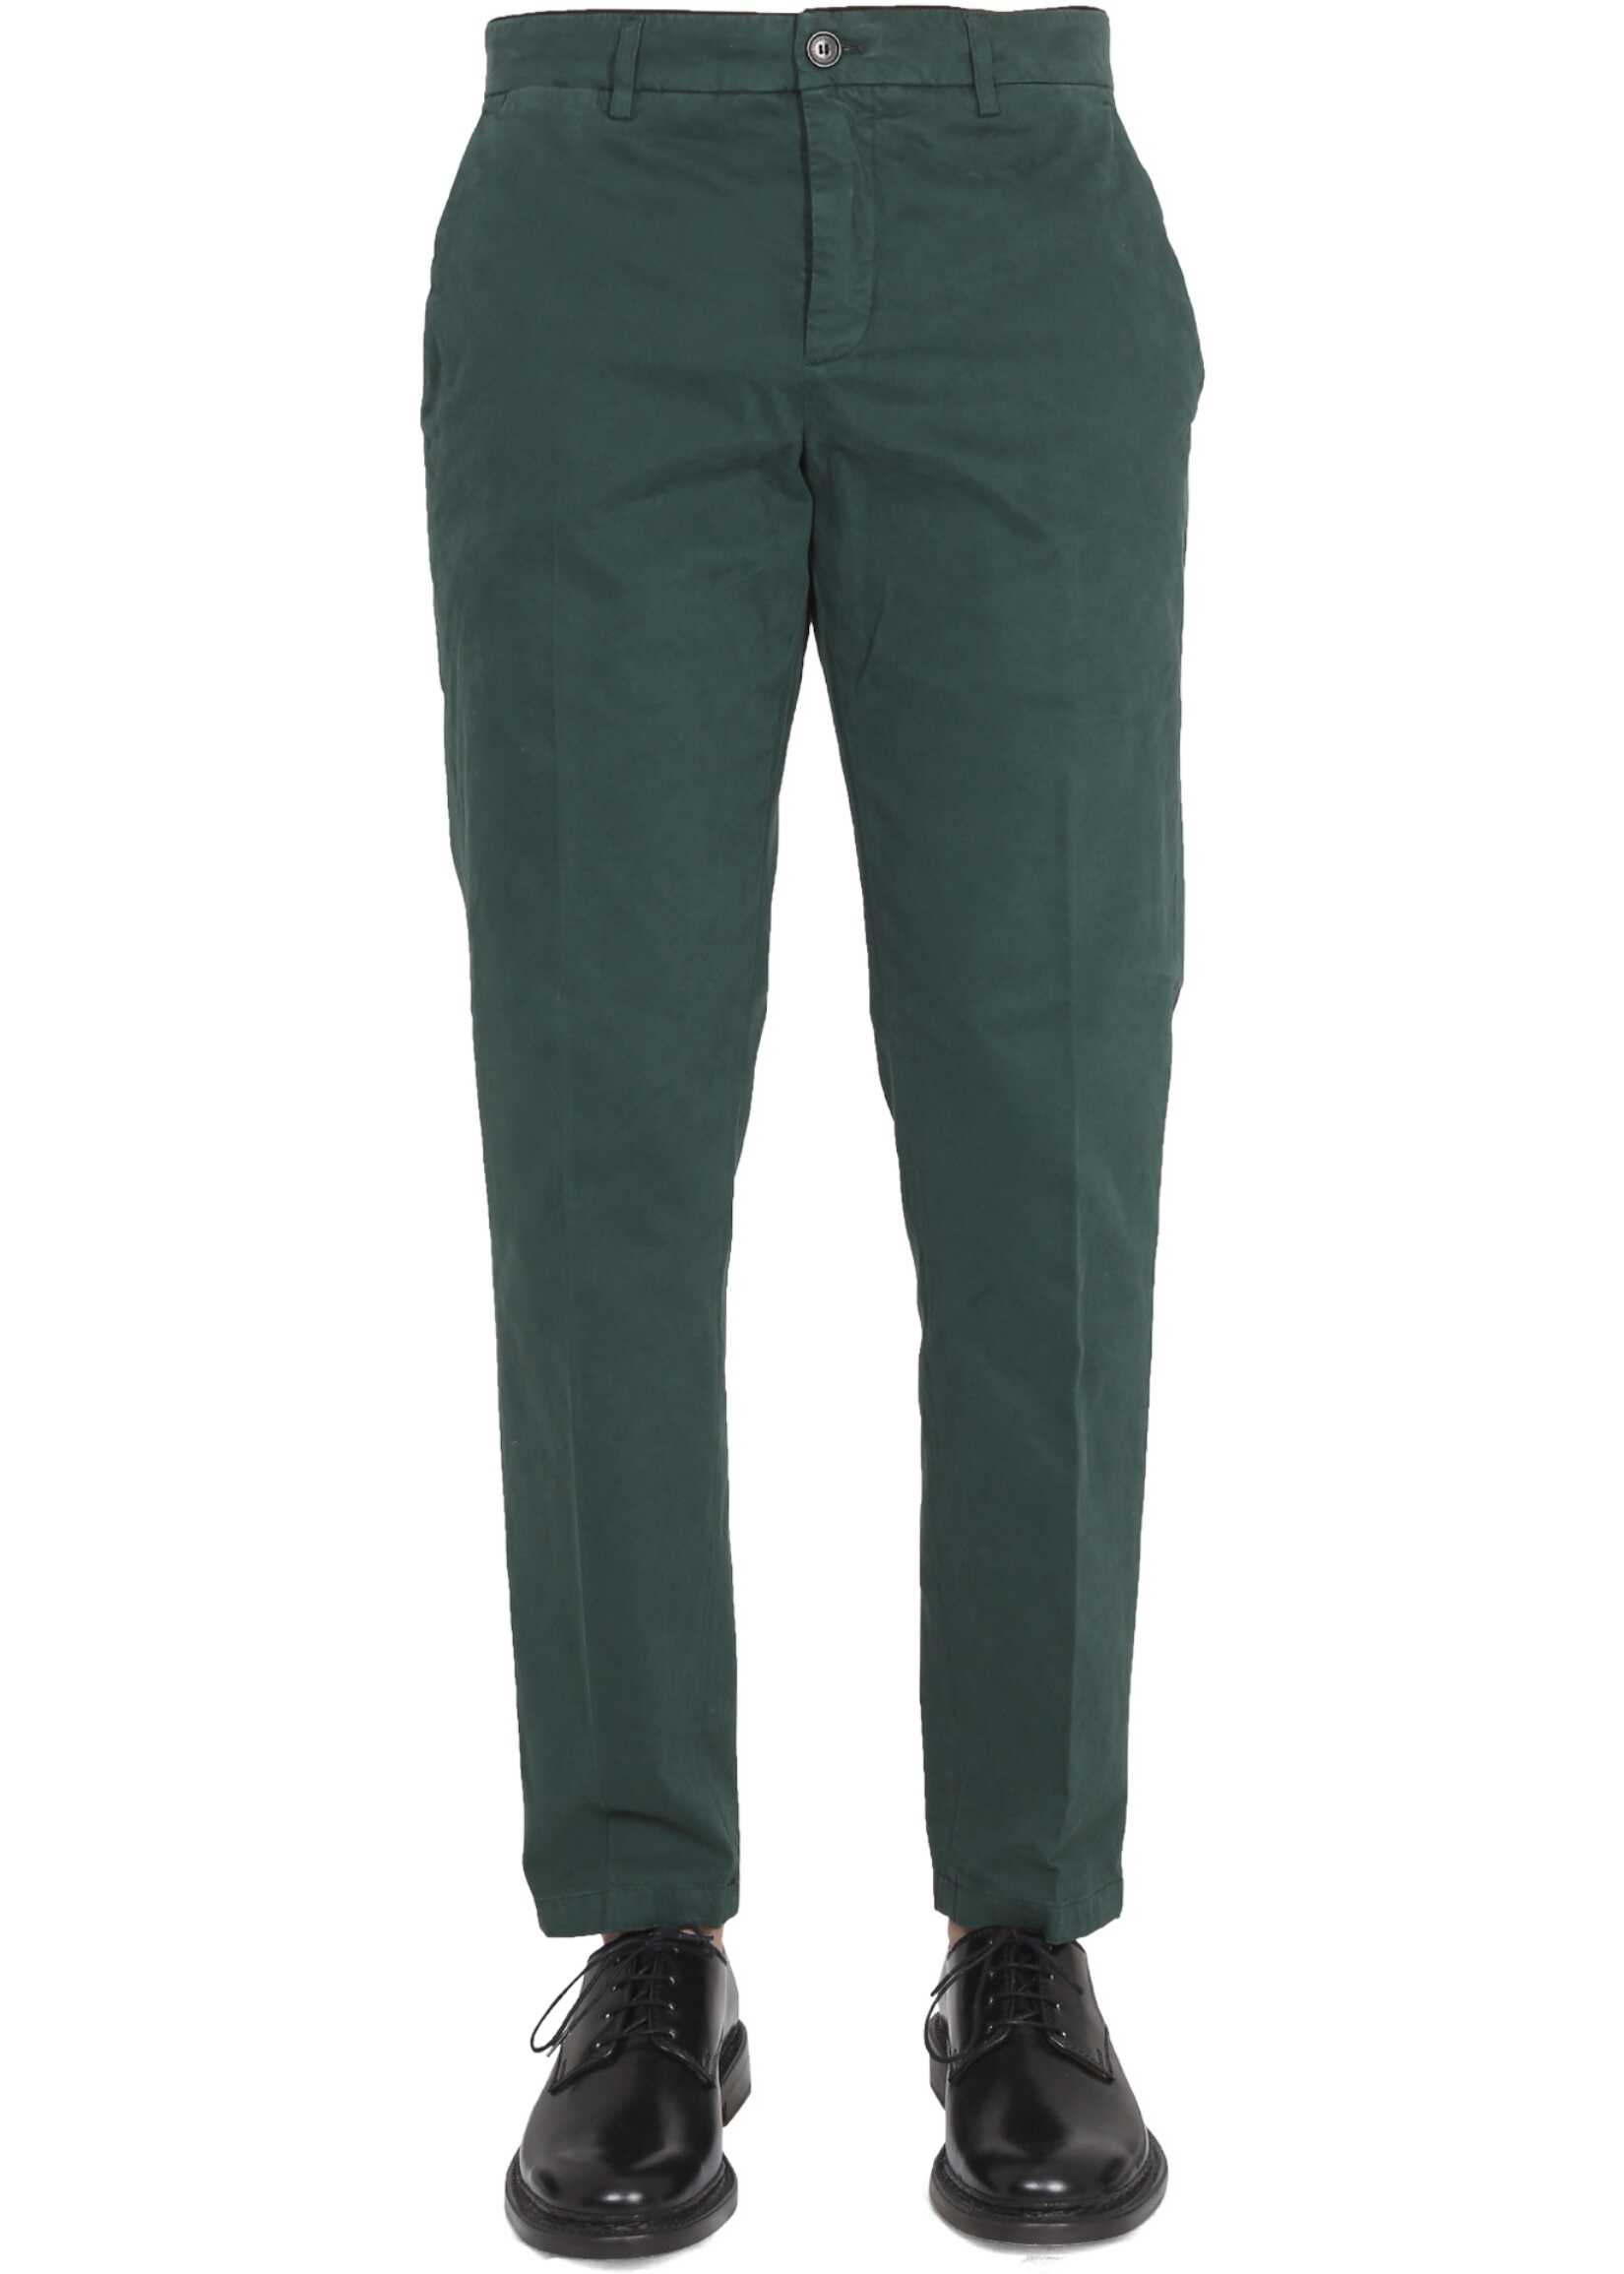 Department Five Setter Chino Pants GREEN